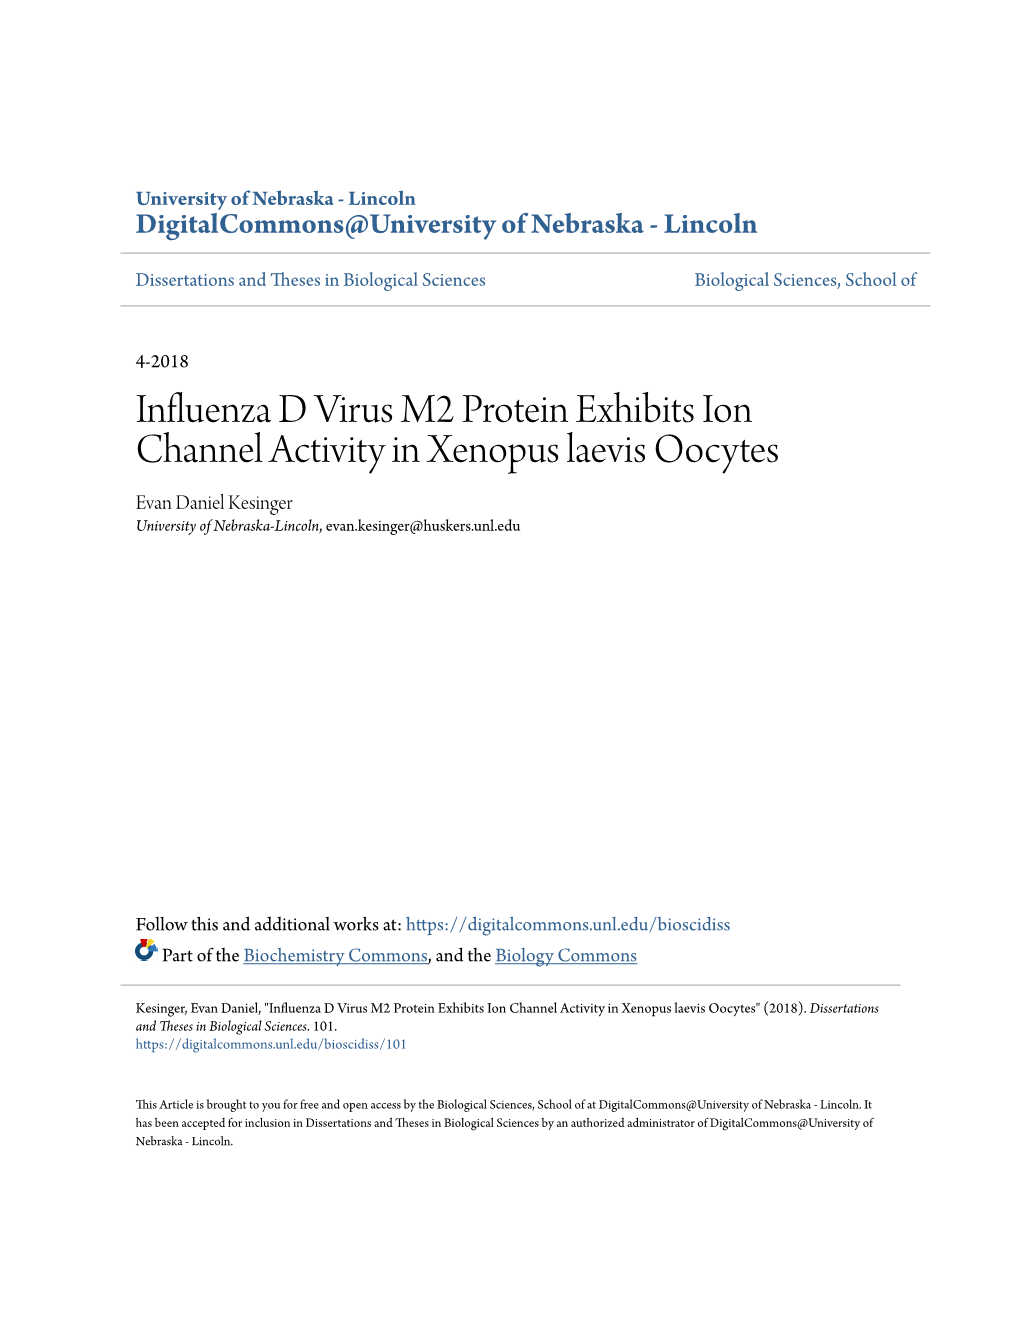 Influenza D Virus M2 Protein Exhibits Ion Channel Activity in Xenopus